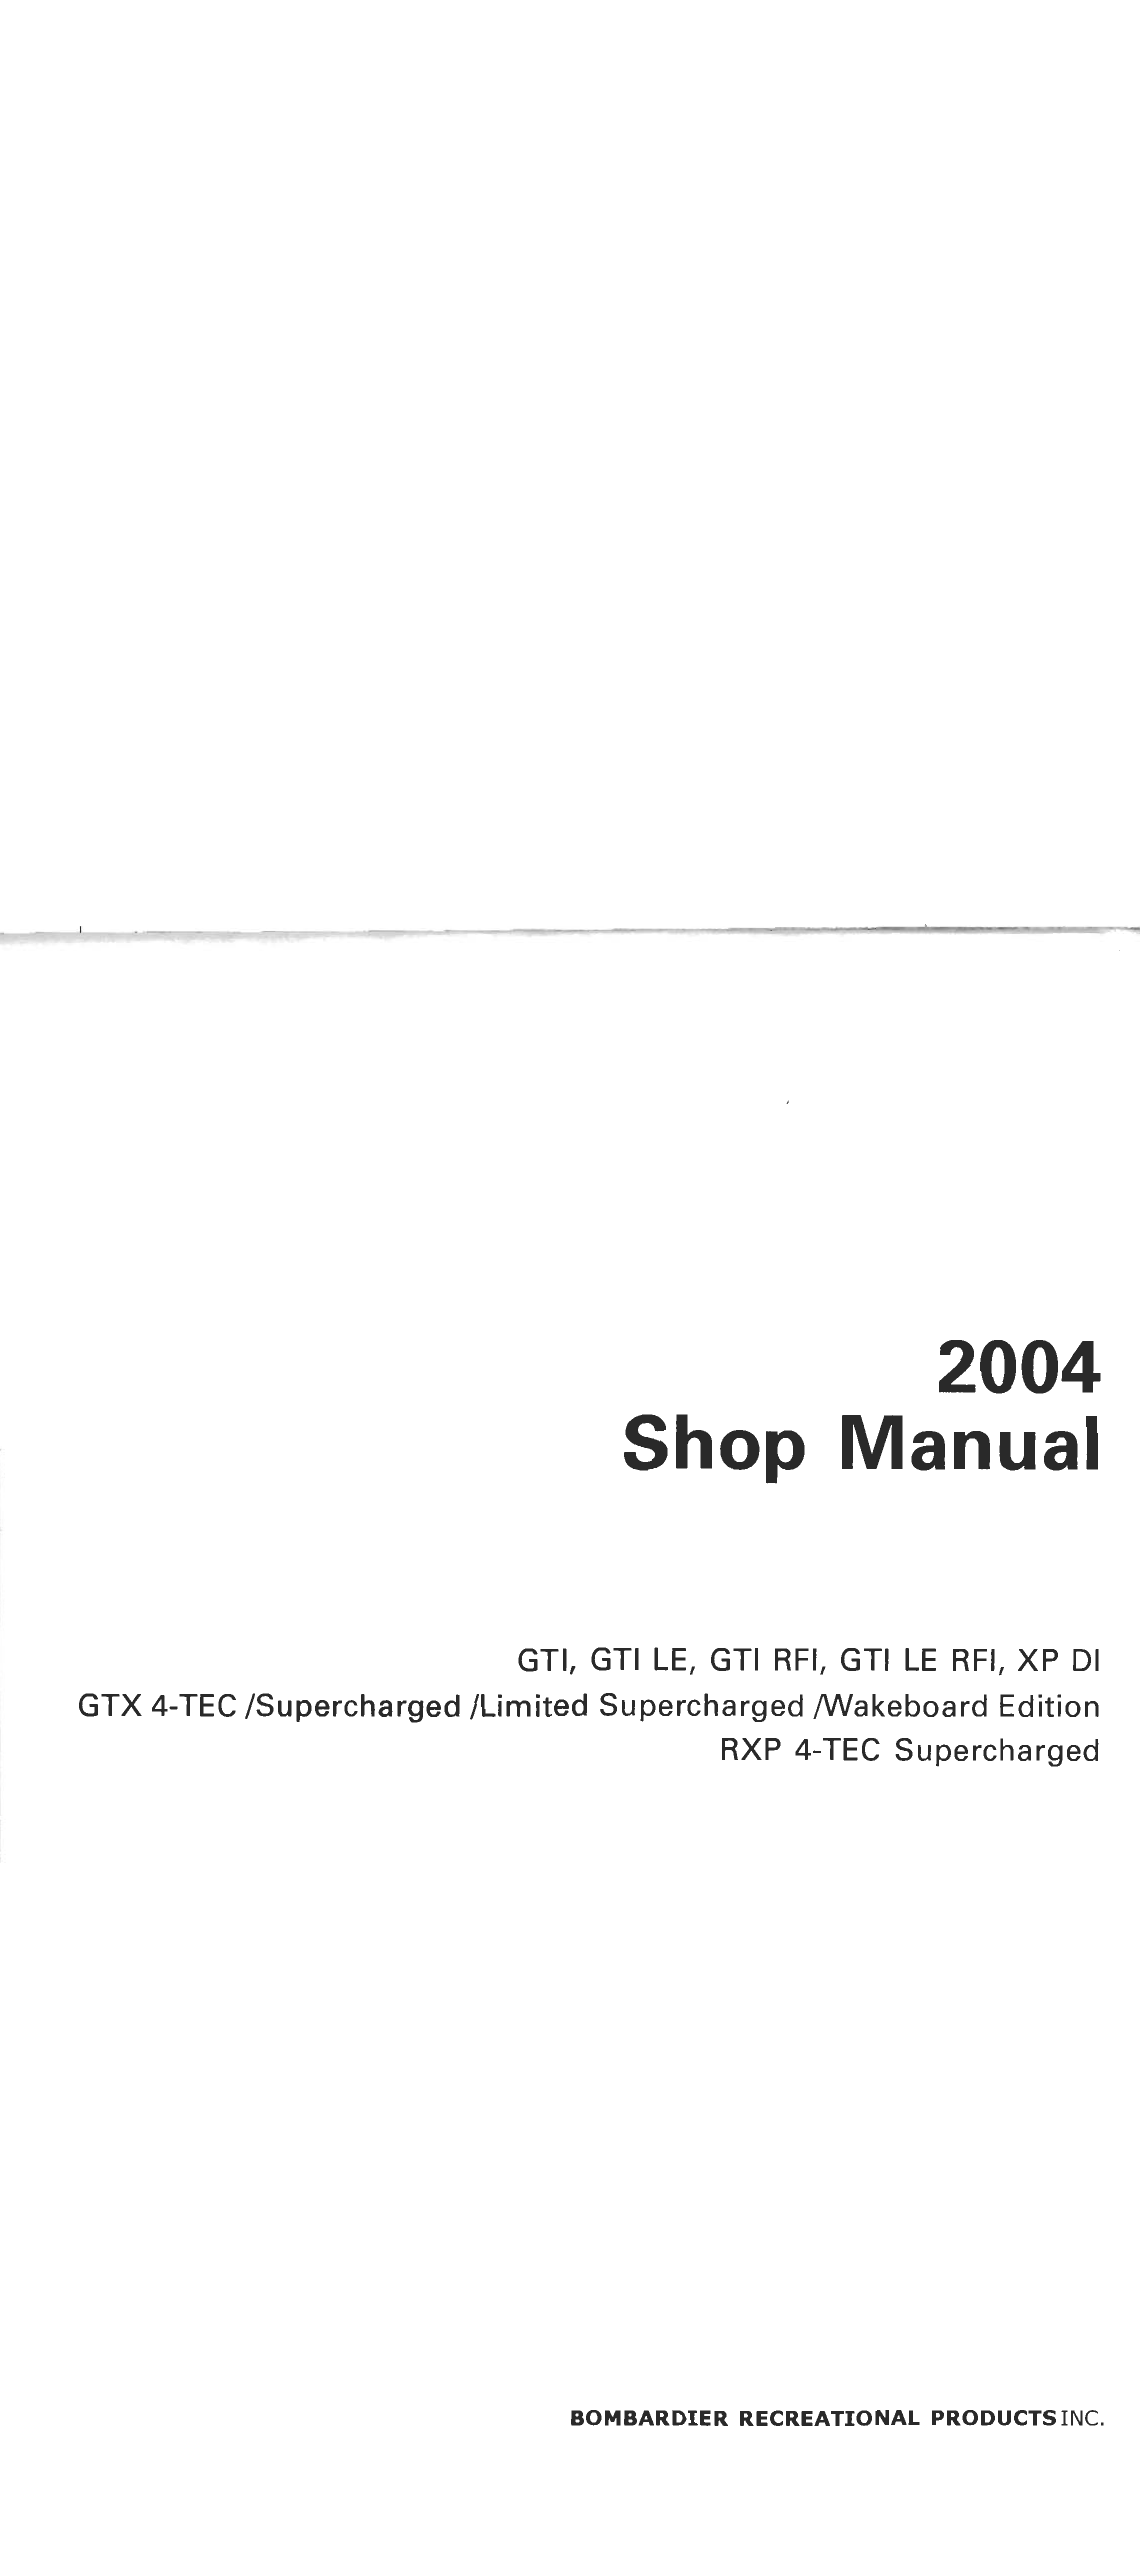 2004 Bombardier GTI, LE, RFI, LE, RFI, XP, DI, GTX 4-TEC, Supercharged, Limited Supercharged, Wakeboard Edition RXP 4-TEC Supercharged Sea-Doo service manual Preview image 2